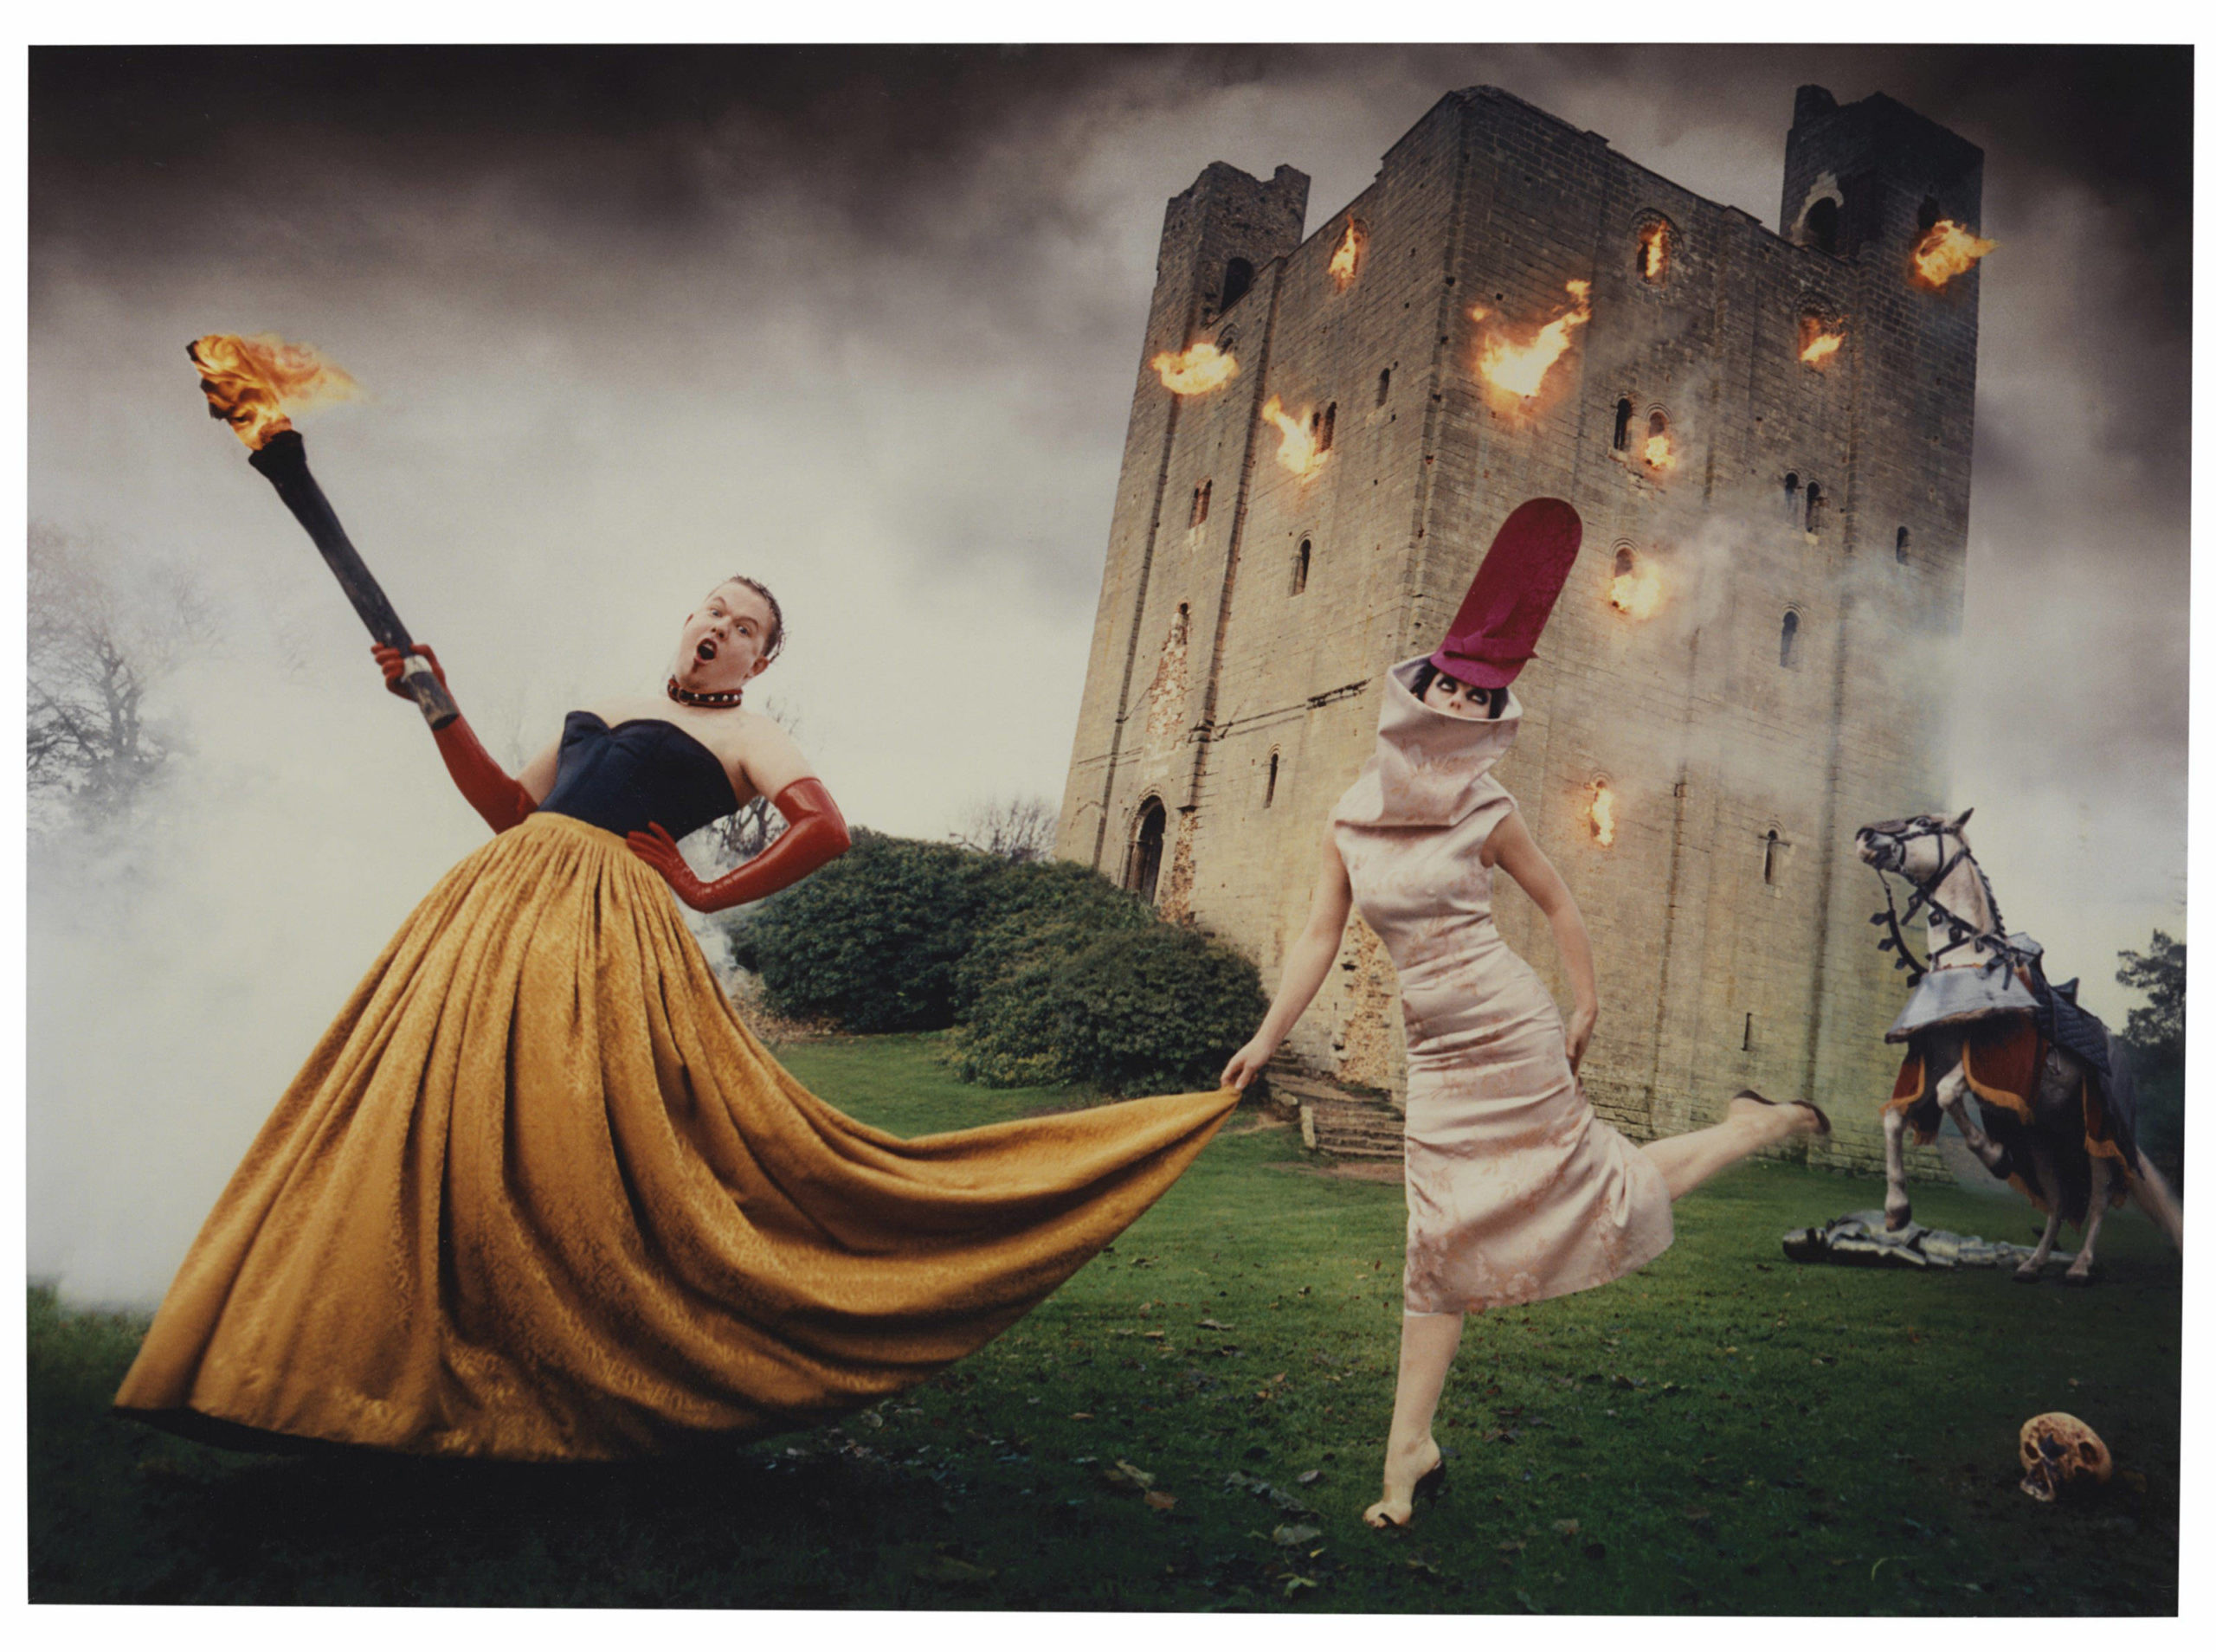 Alexander McQueen and Isabella Blow: Burning Down the House, (1997)